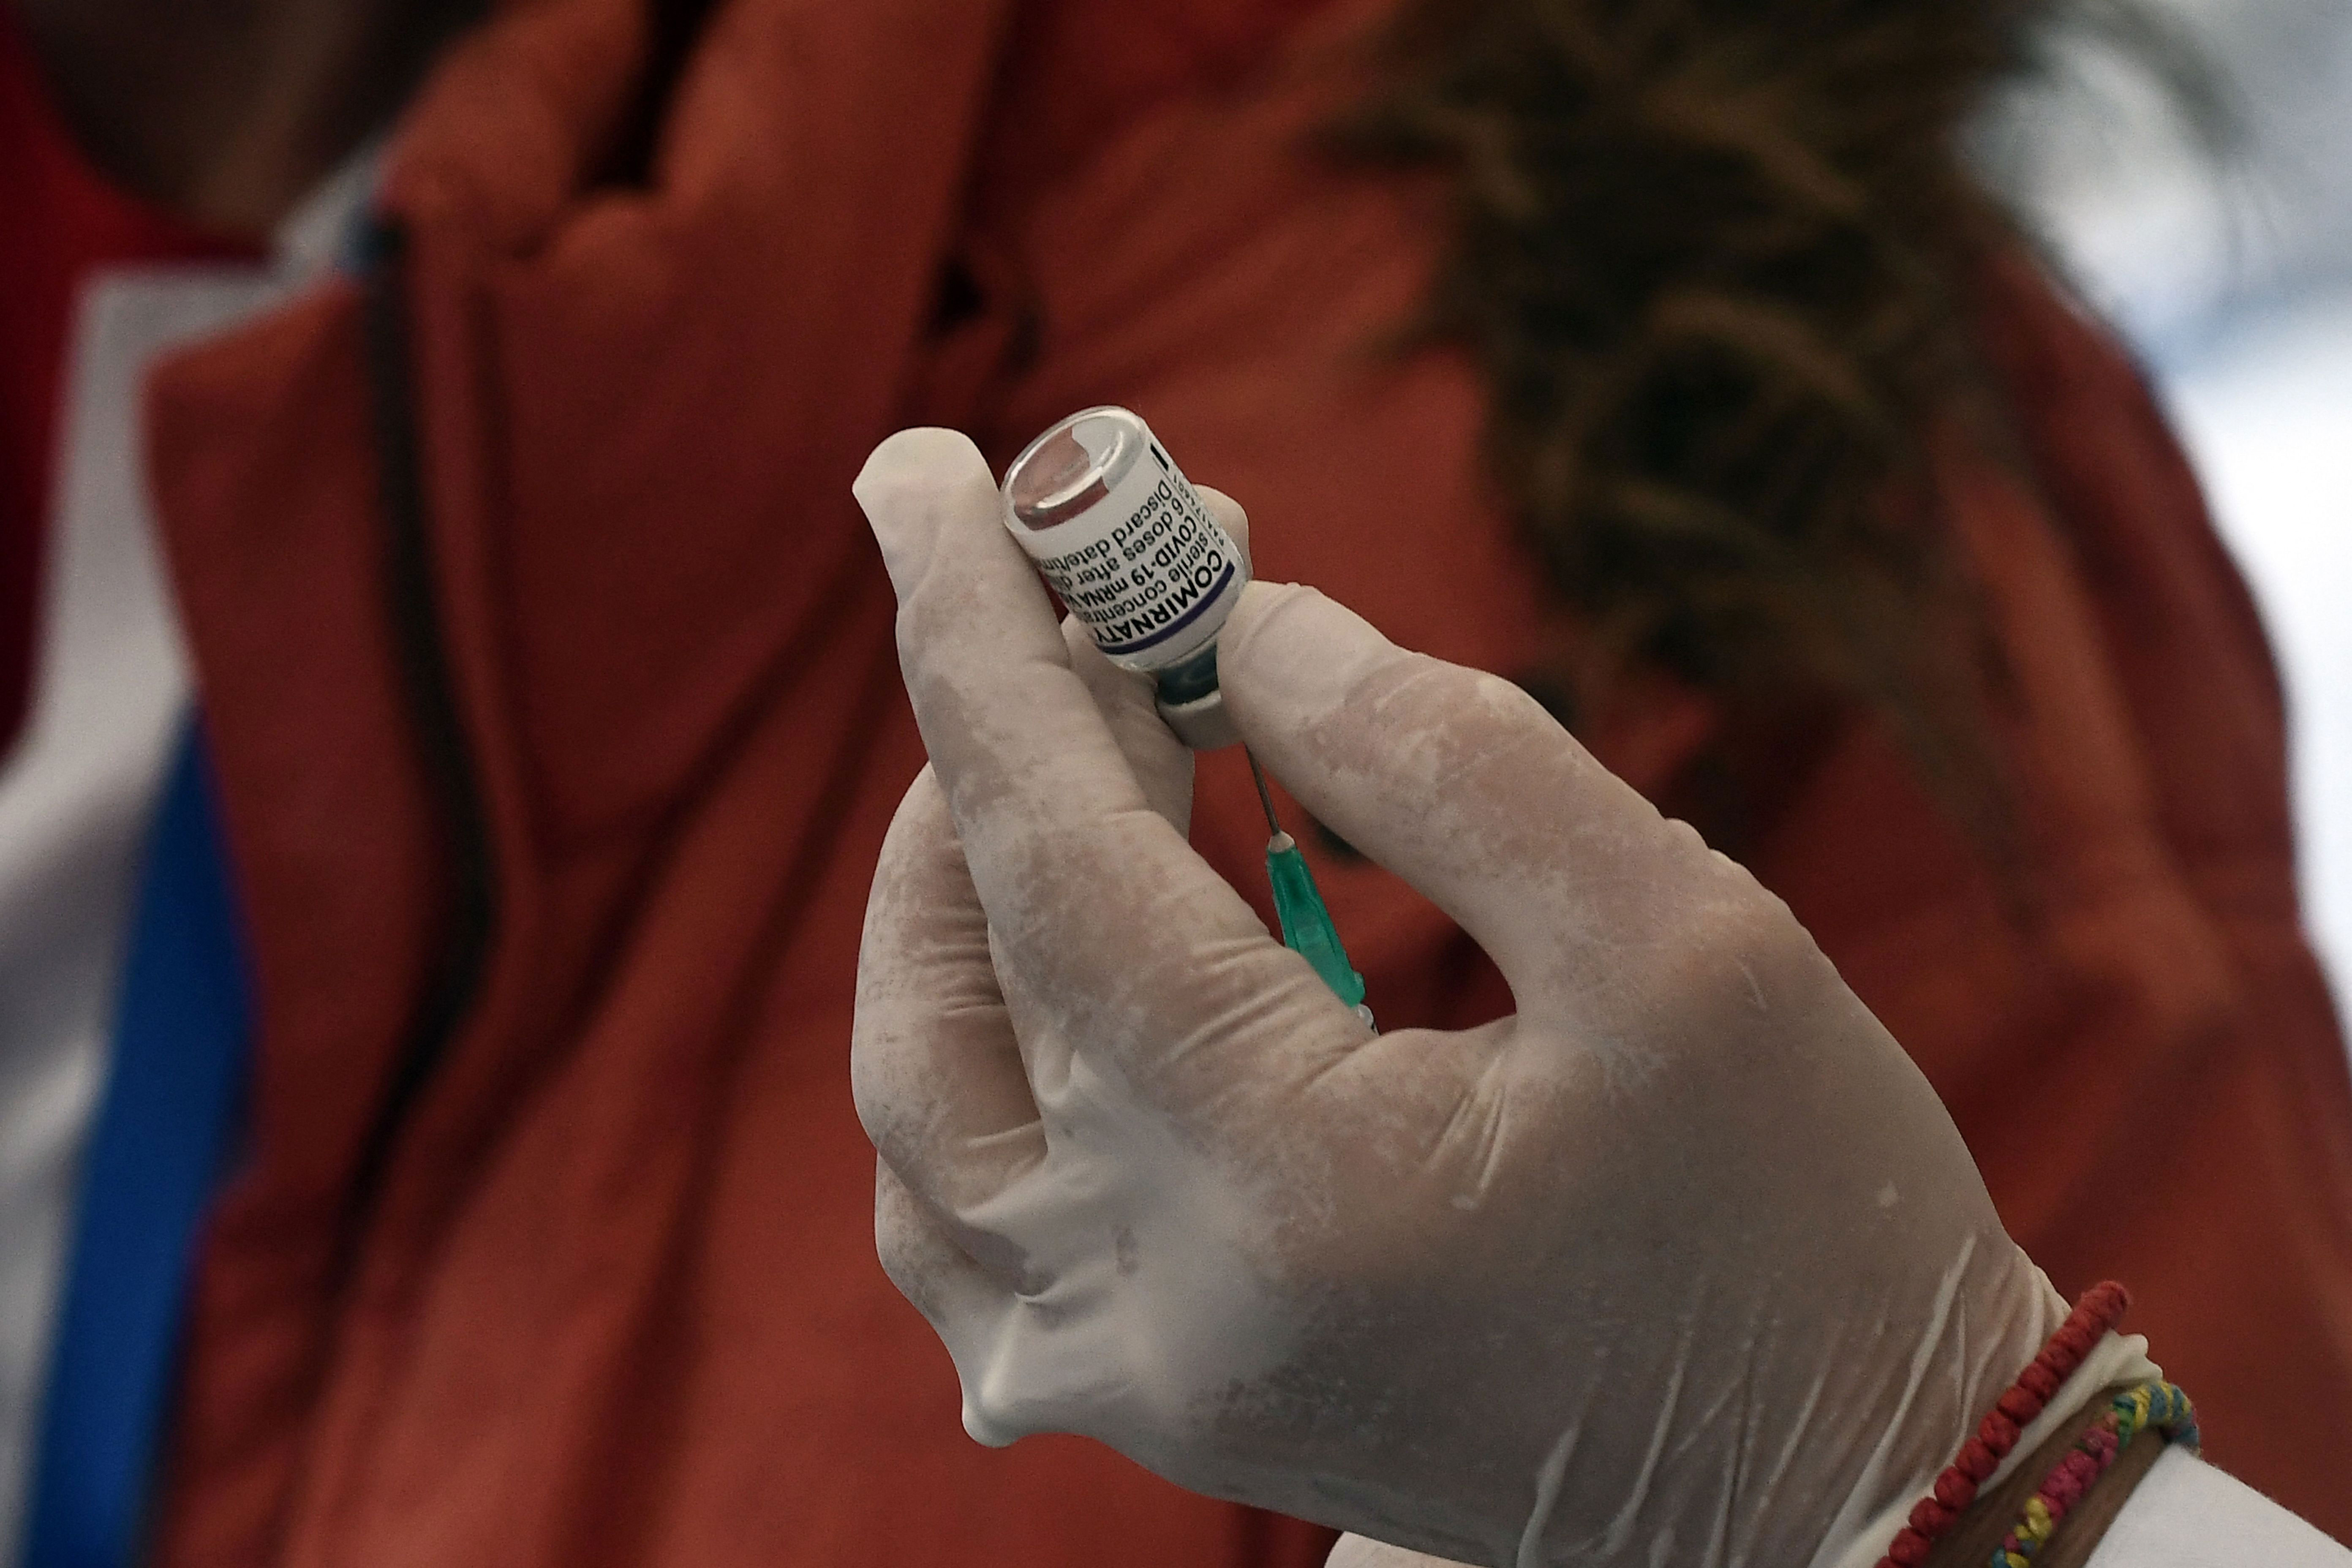 A health worker prepares a dose of the Pfizer-BioNTech vaccine in Thessaloniki on November 26.